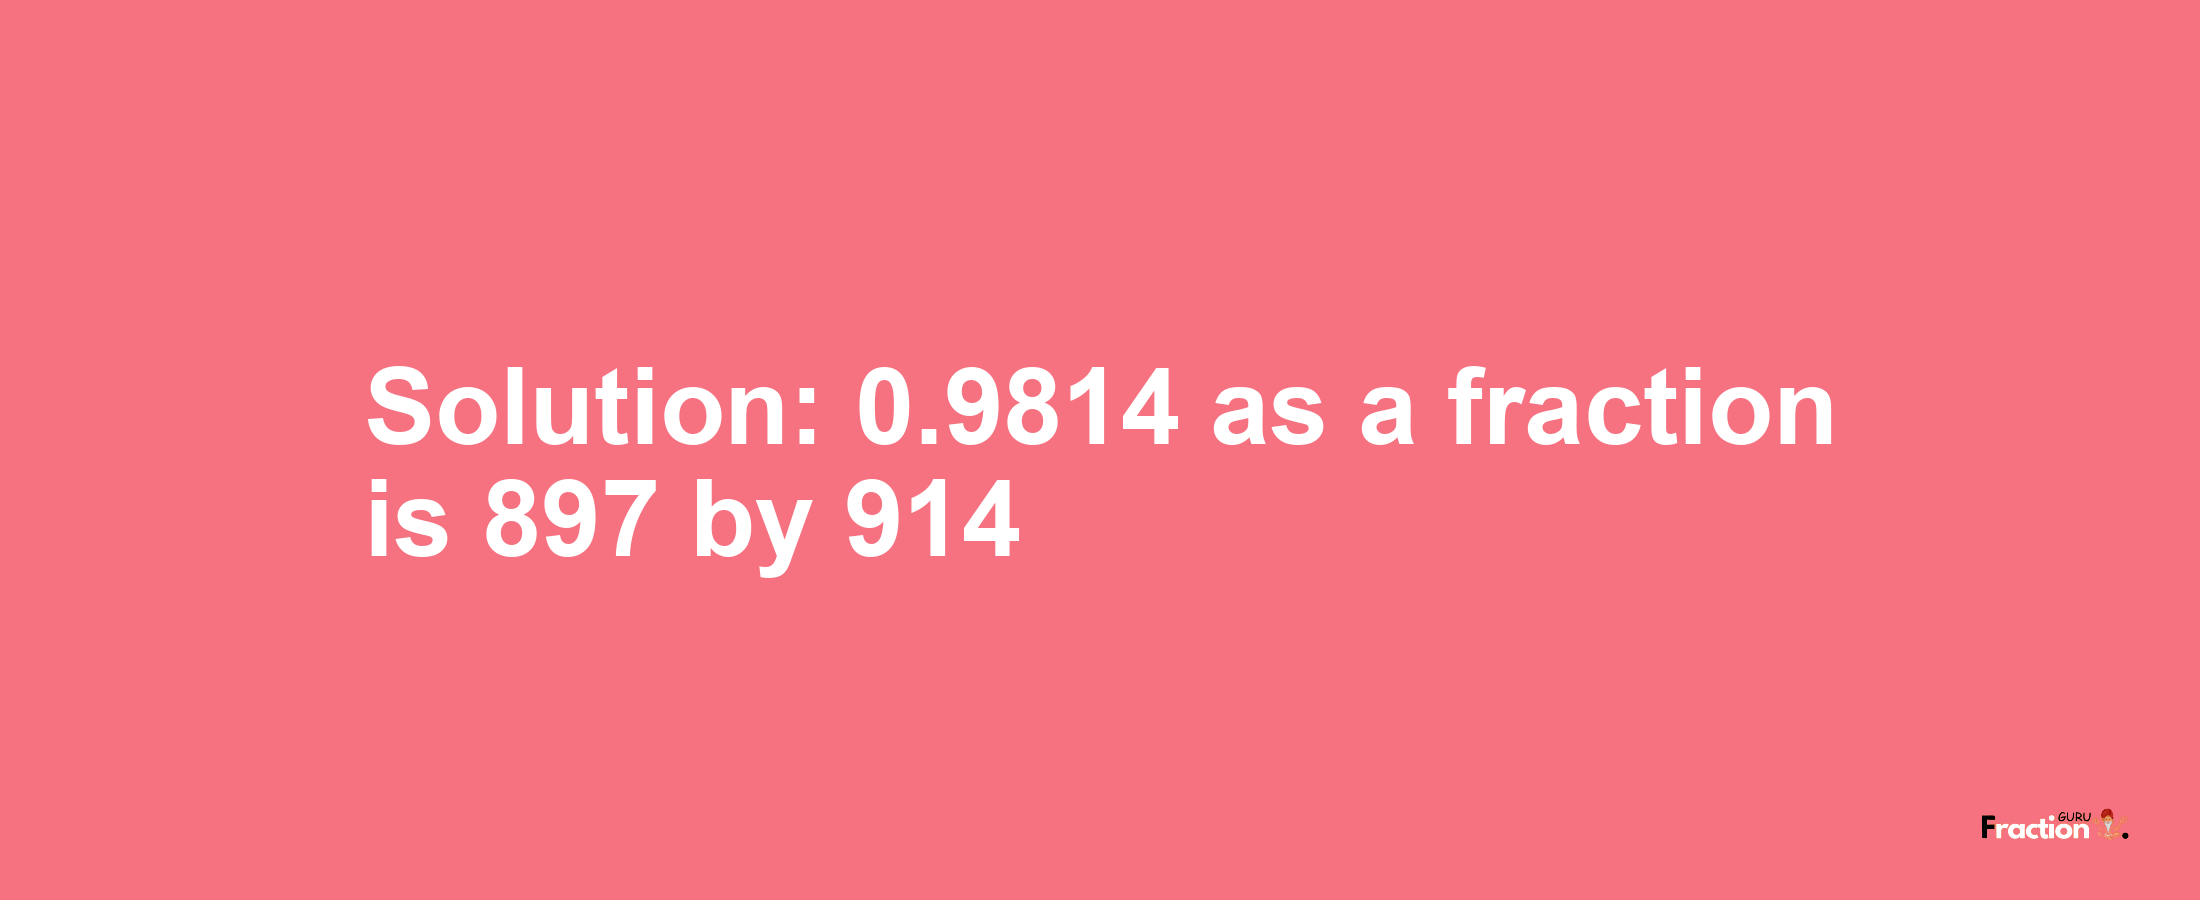 Solution:0.9814 as a fraction is 897/914